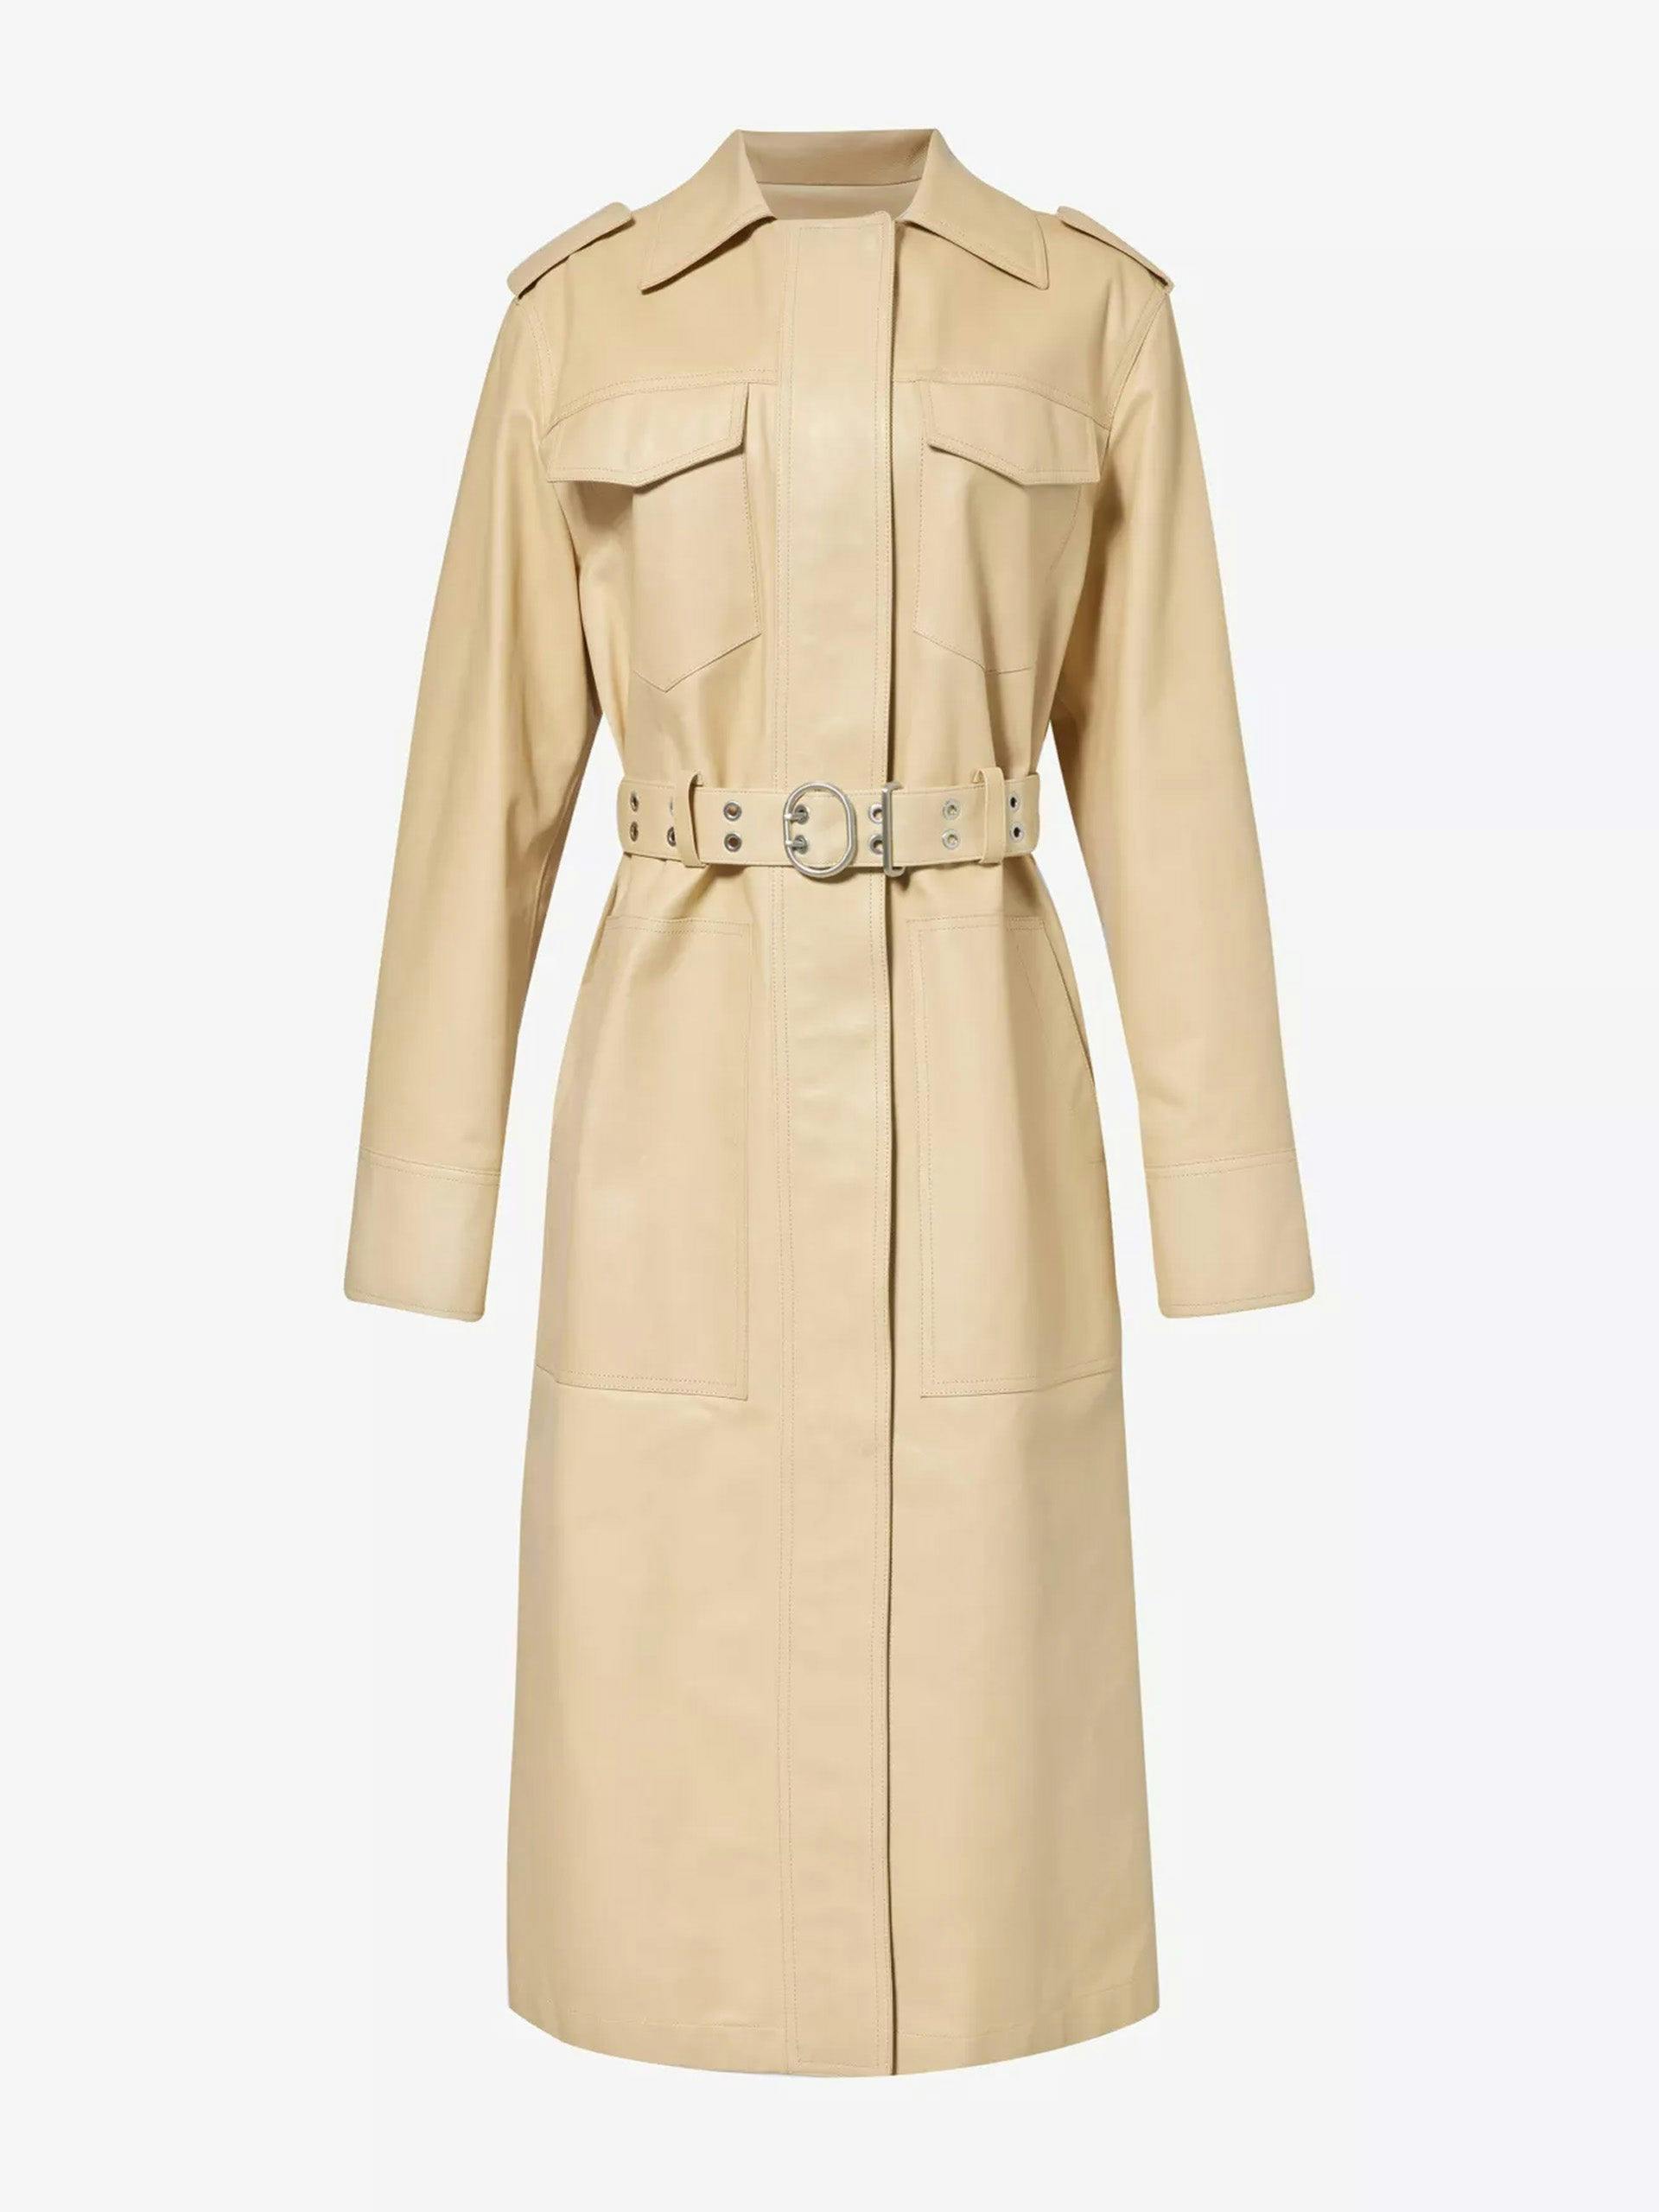 Spread-collar belted leather trench coat